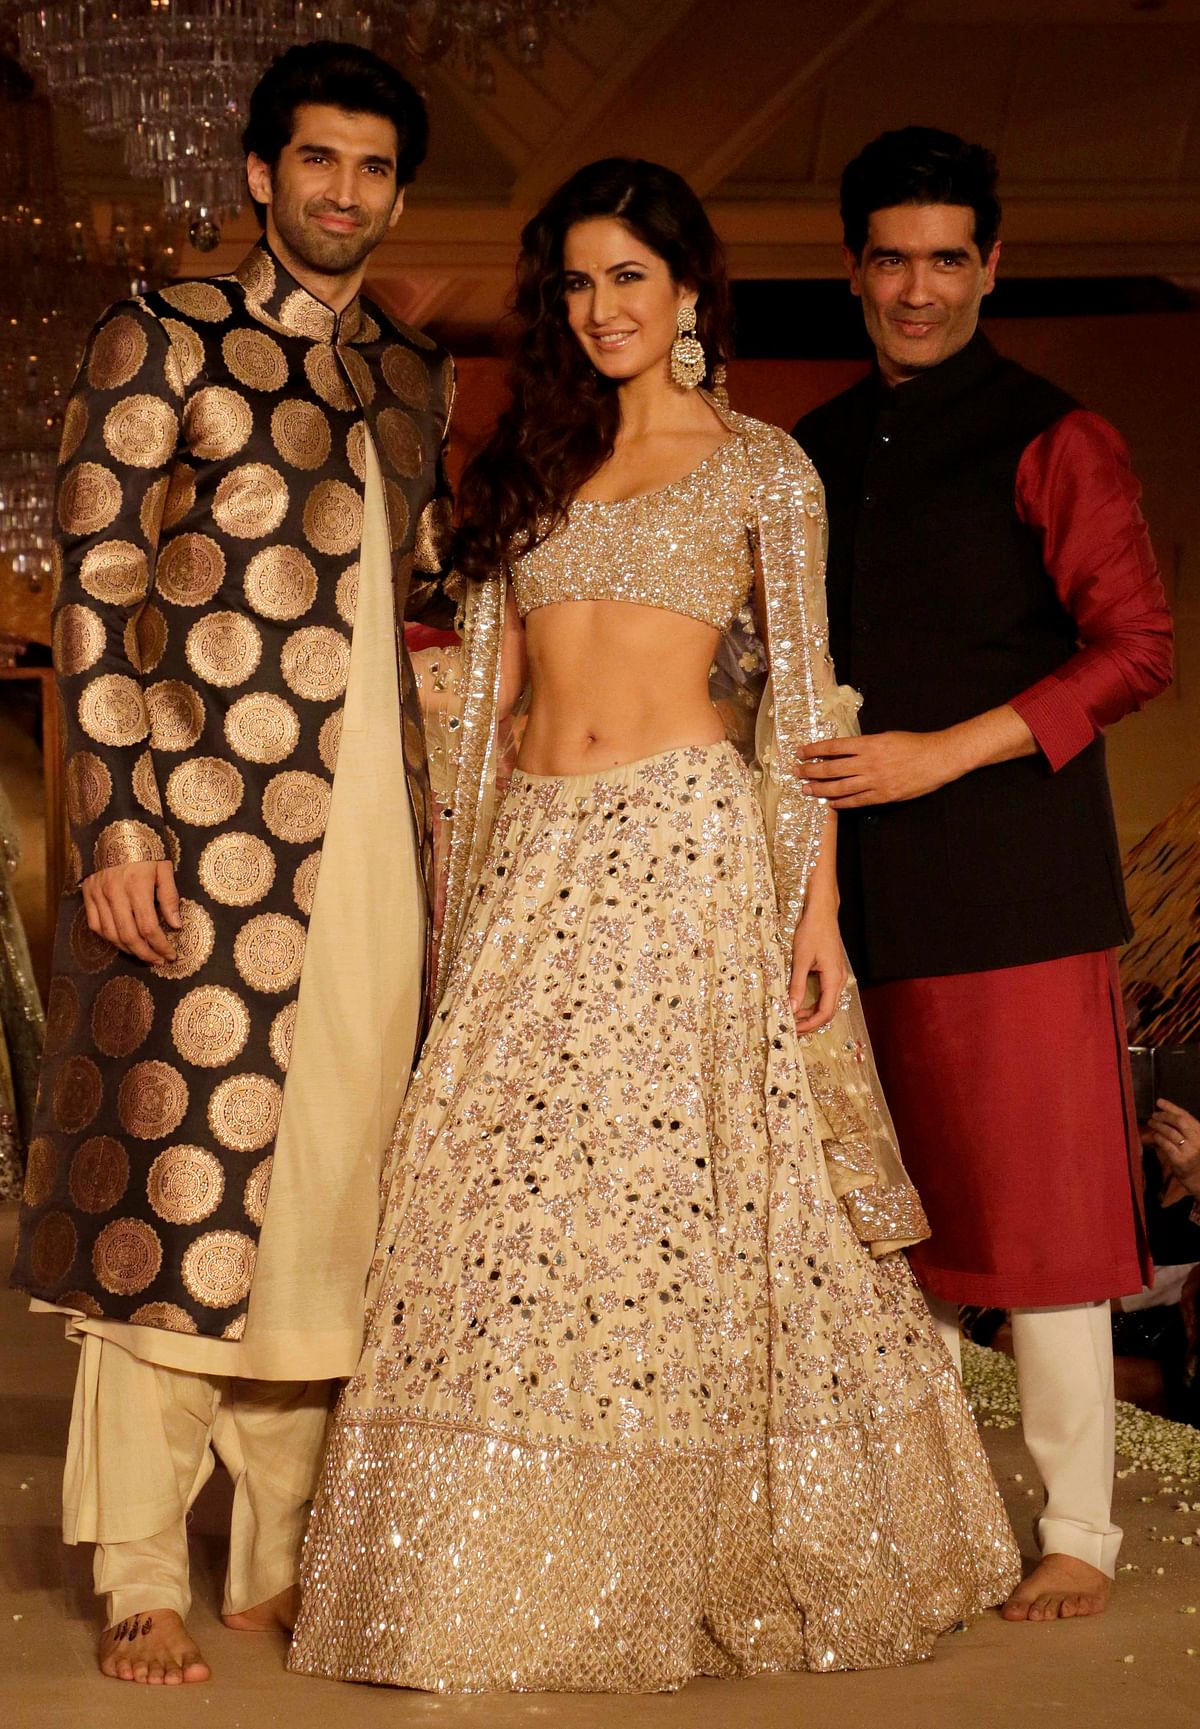 Manish Malhotra organises a fashion show and guess who his showstoppers are? It’s Katrina Kaif and Aditya Roy Kapur!